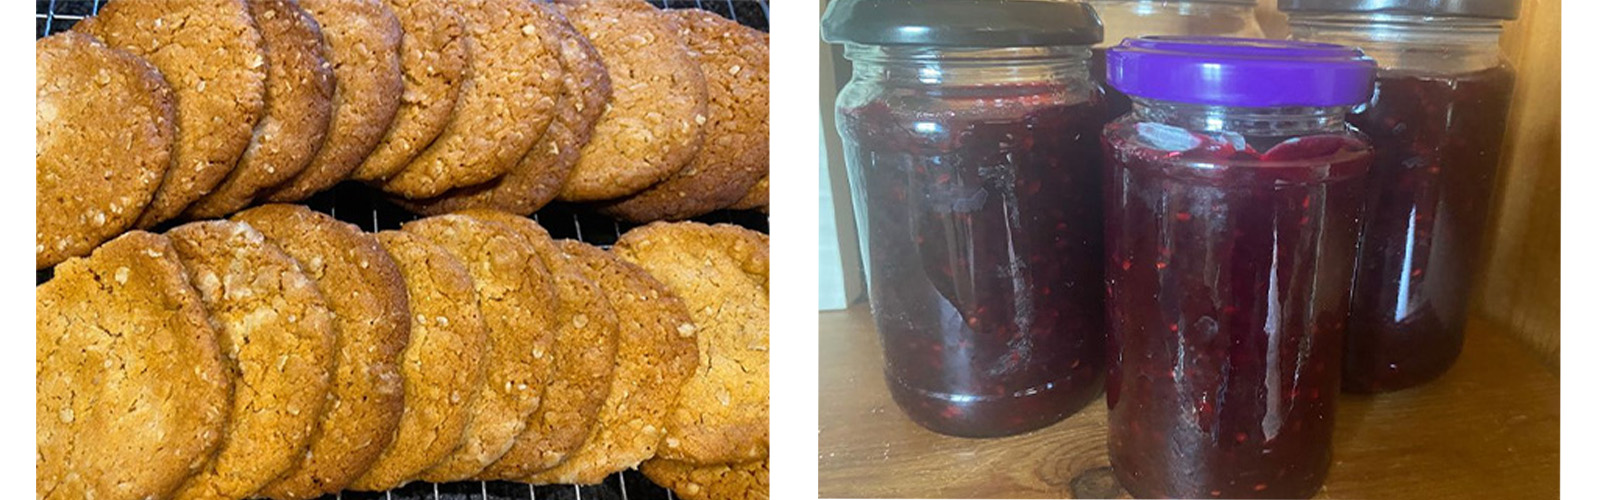 oat cookies and blackberry & apple jam by Lisa Munday